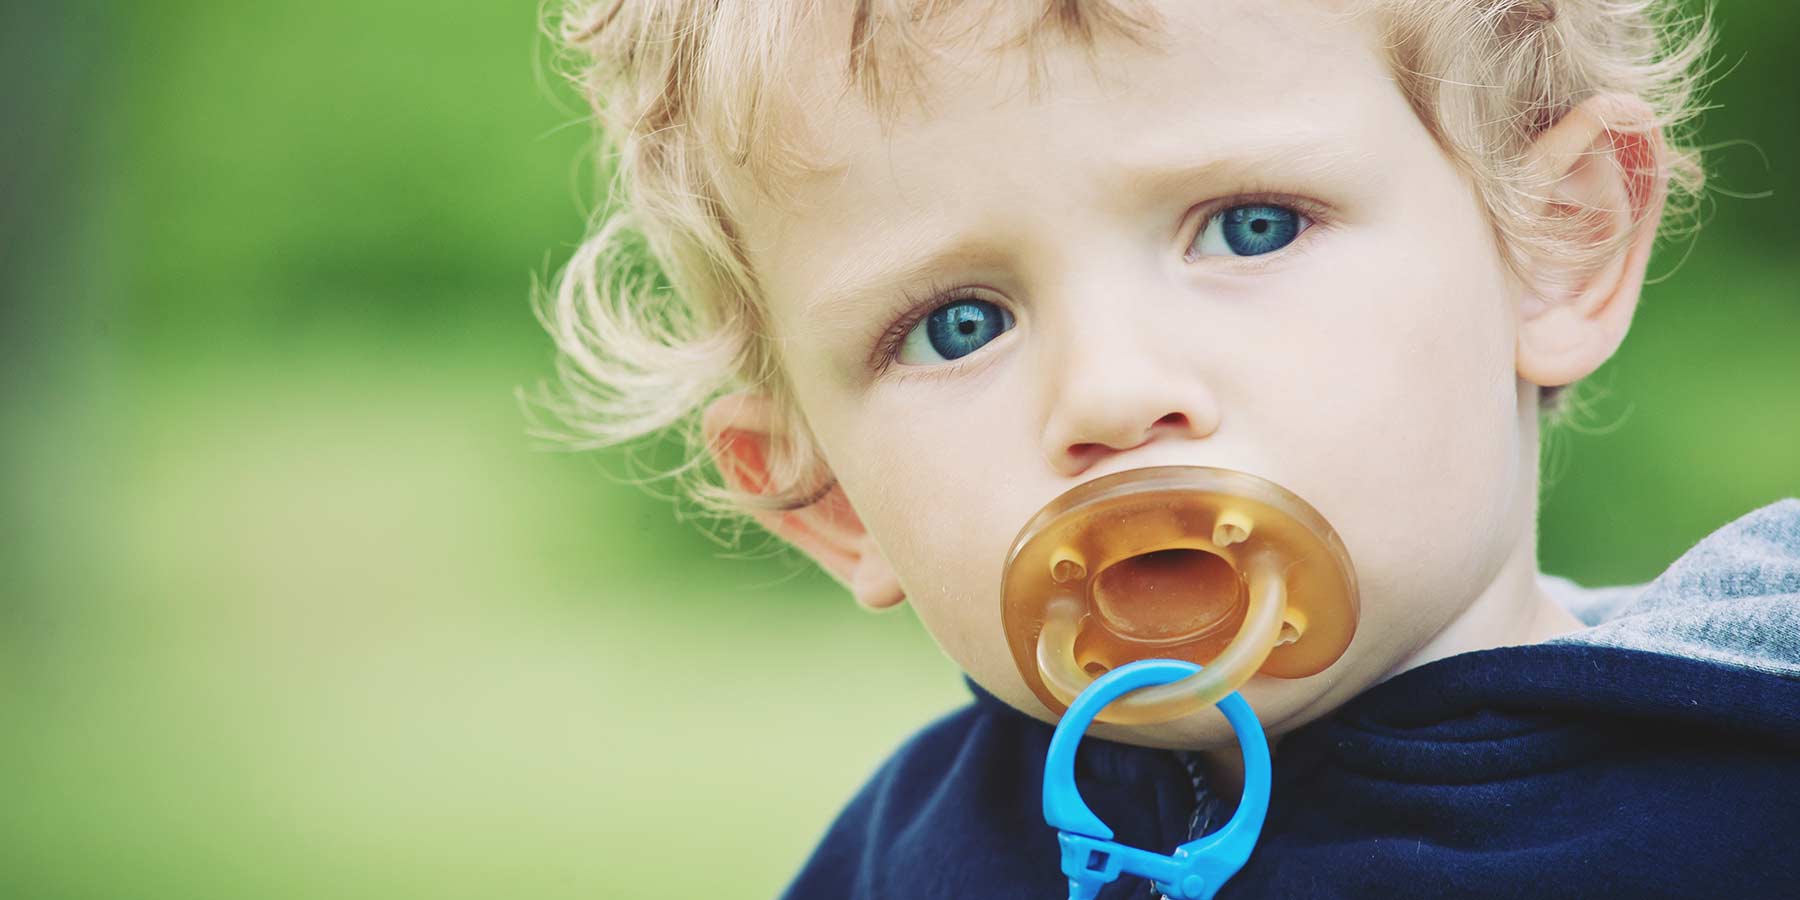 Child with a Pacifier